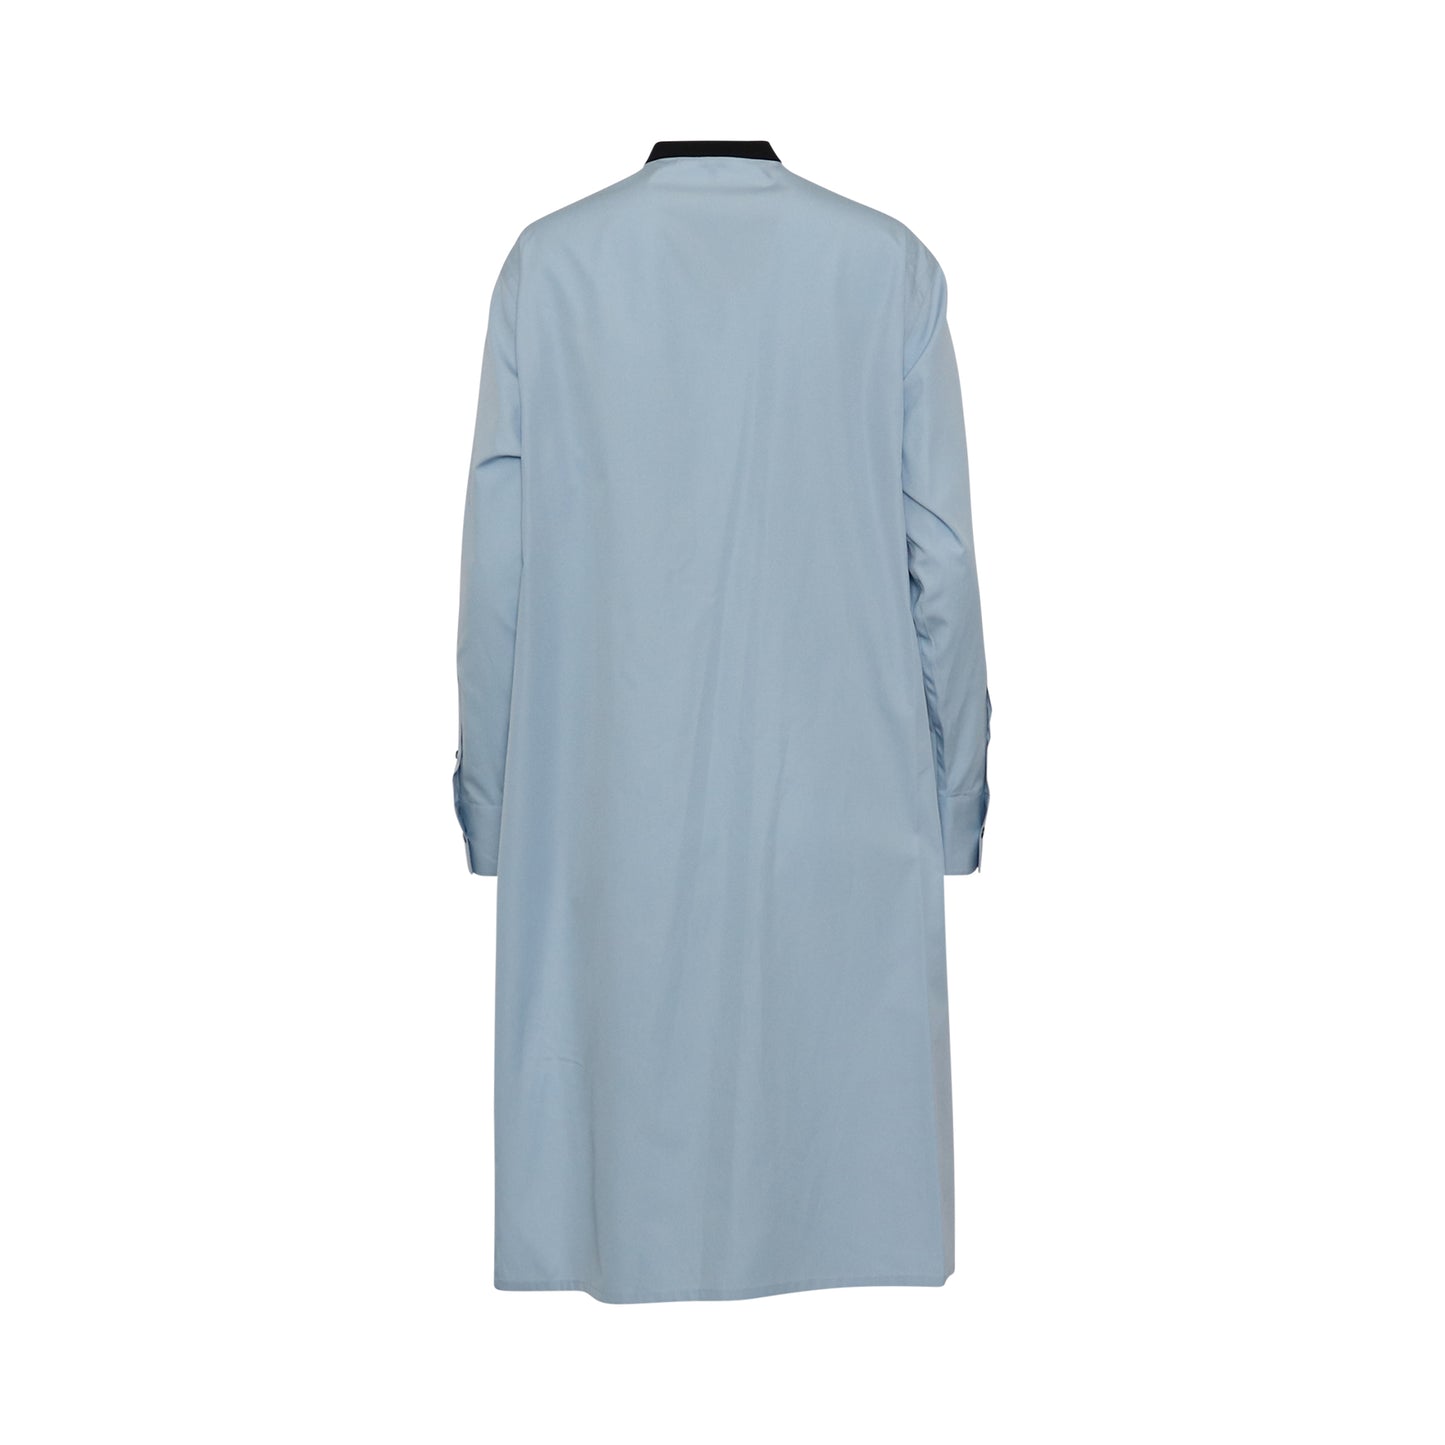 Oversize Tunic Top in Sky Blue